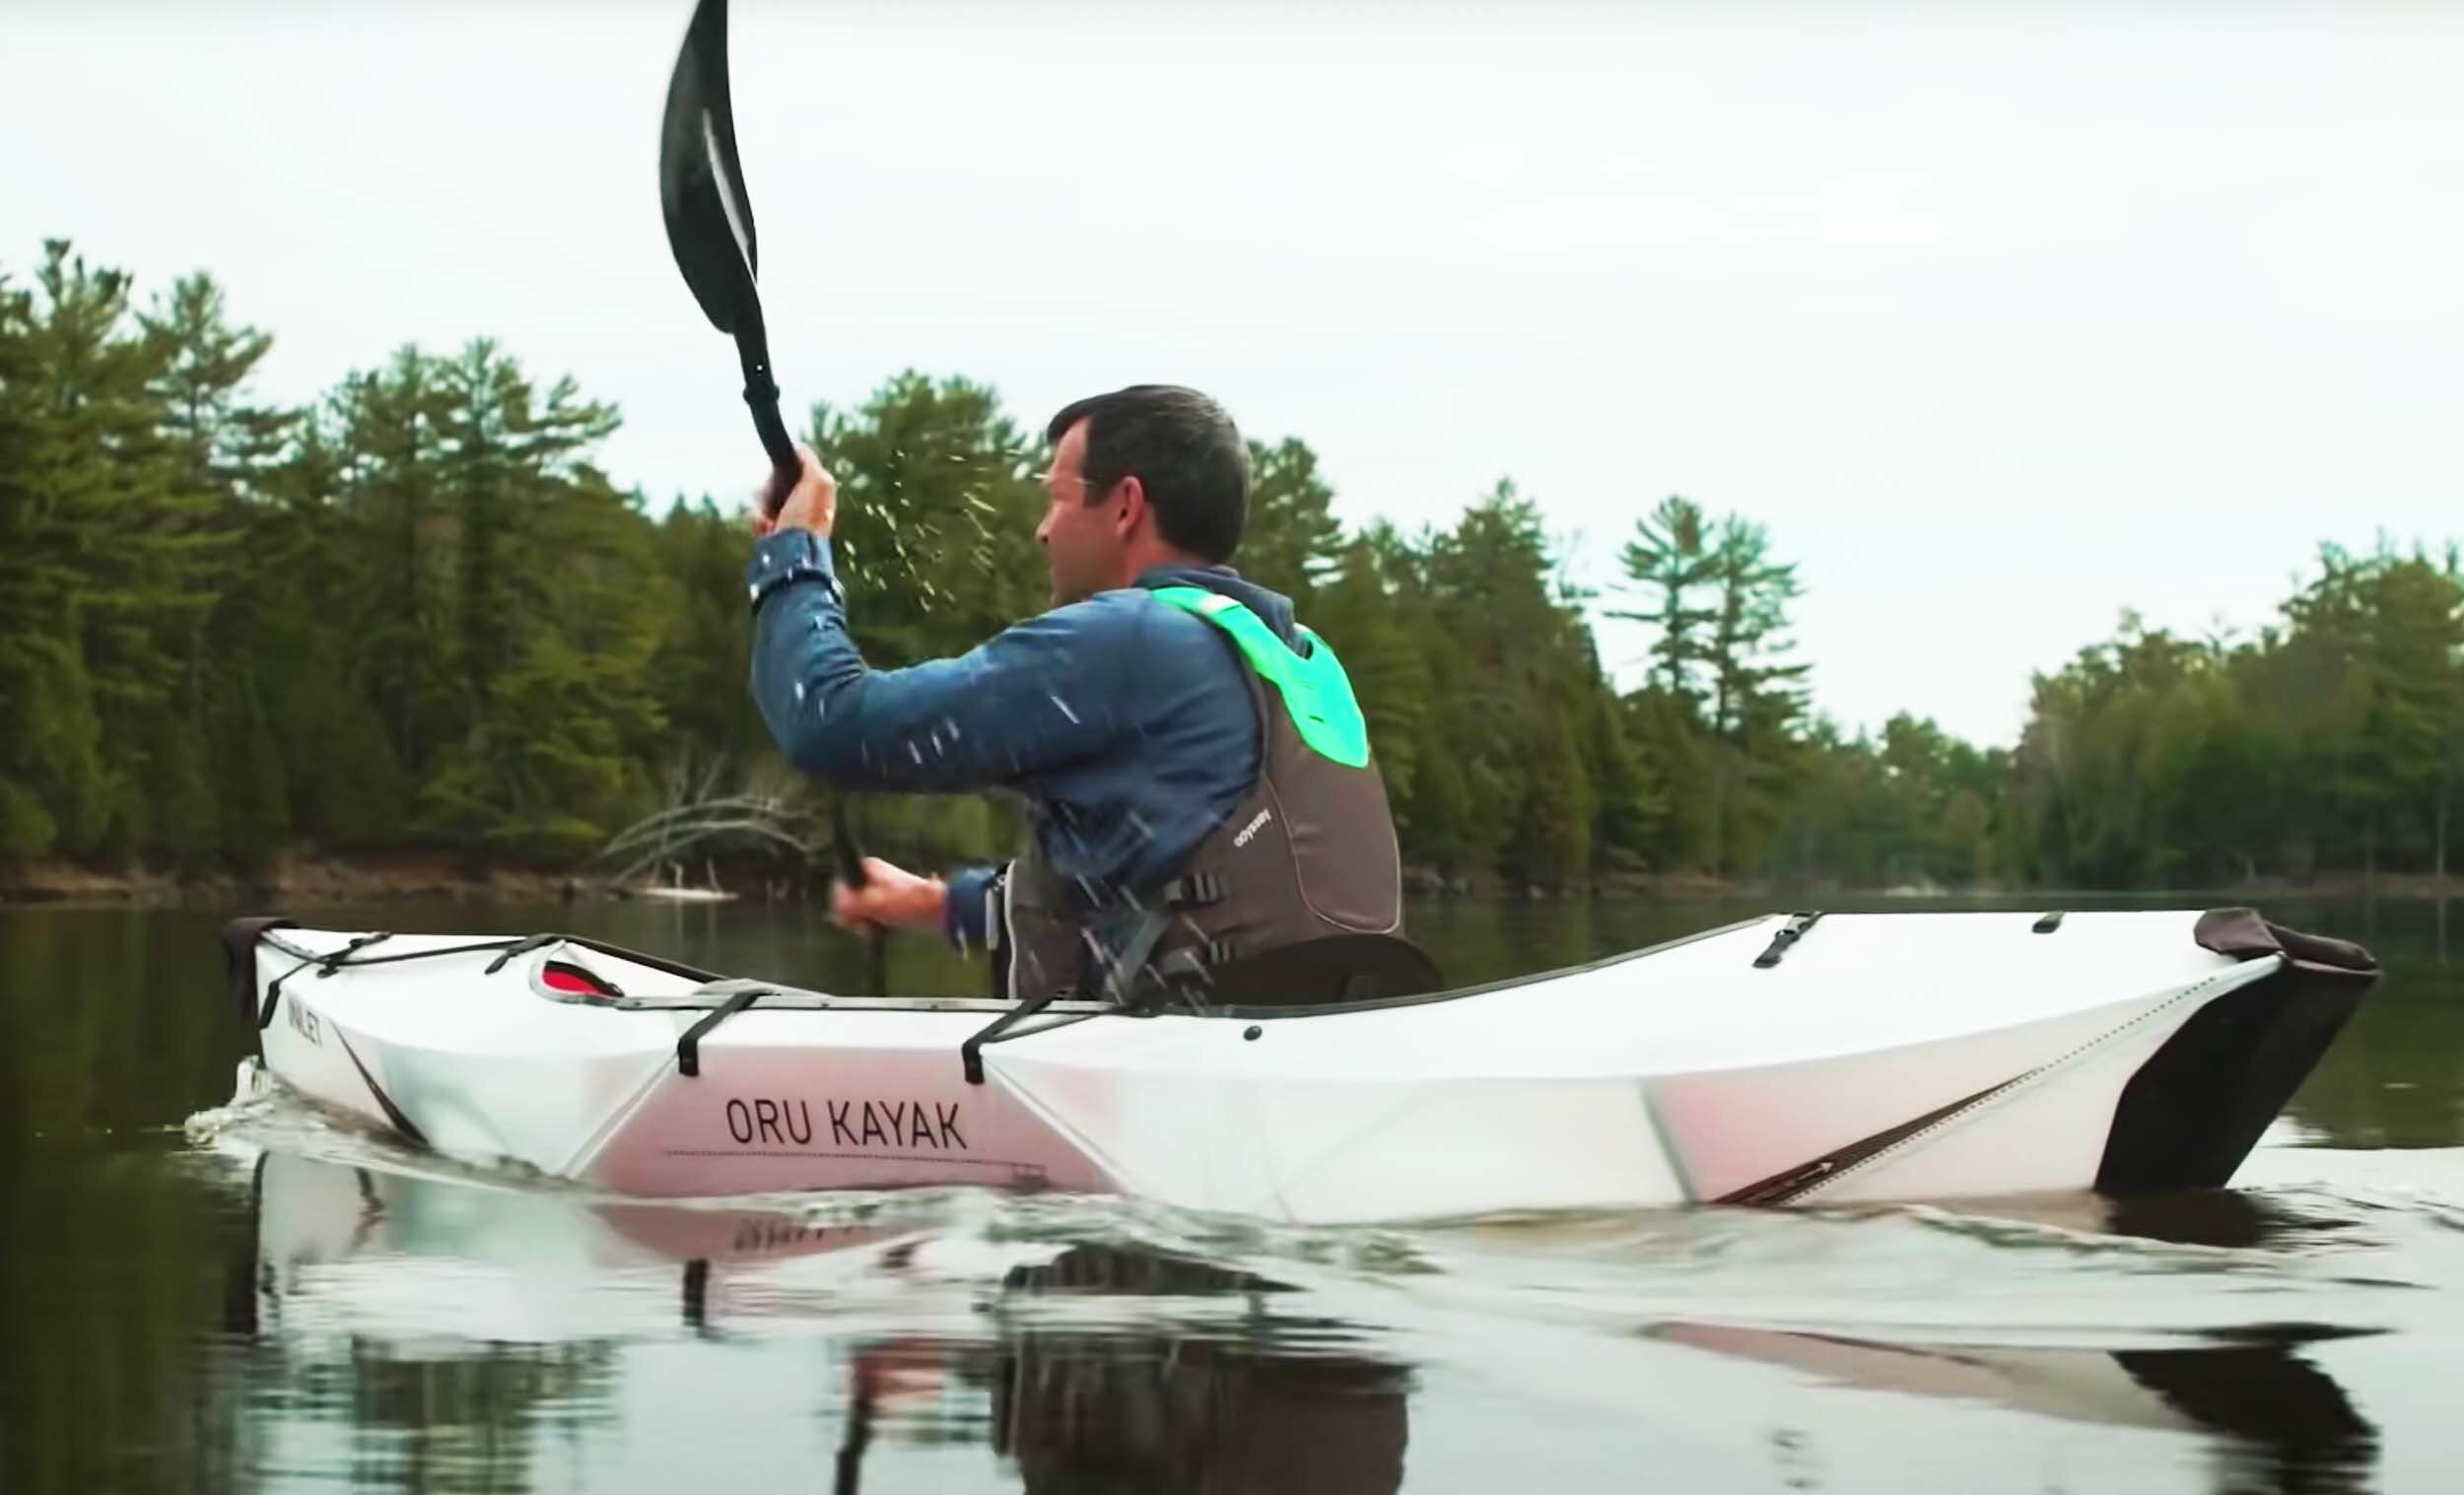 ken whiting testing the oru kayak inlet best in class for beginner kayakers and paddlers